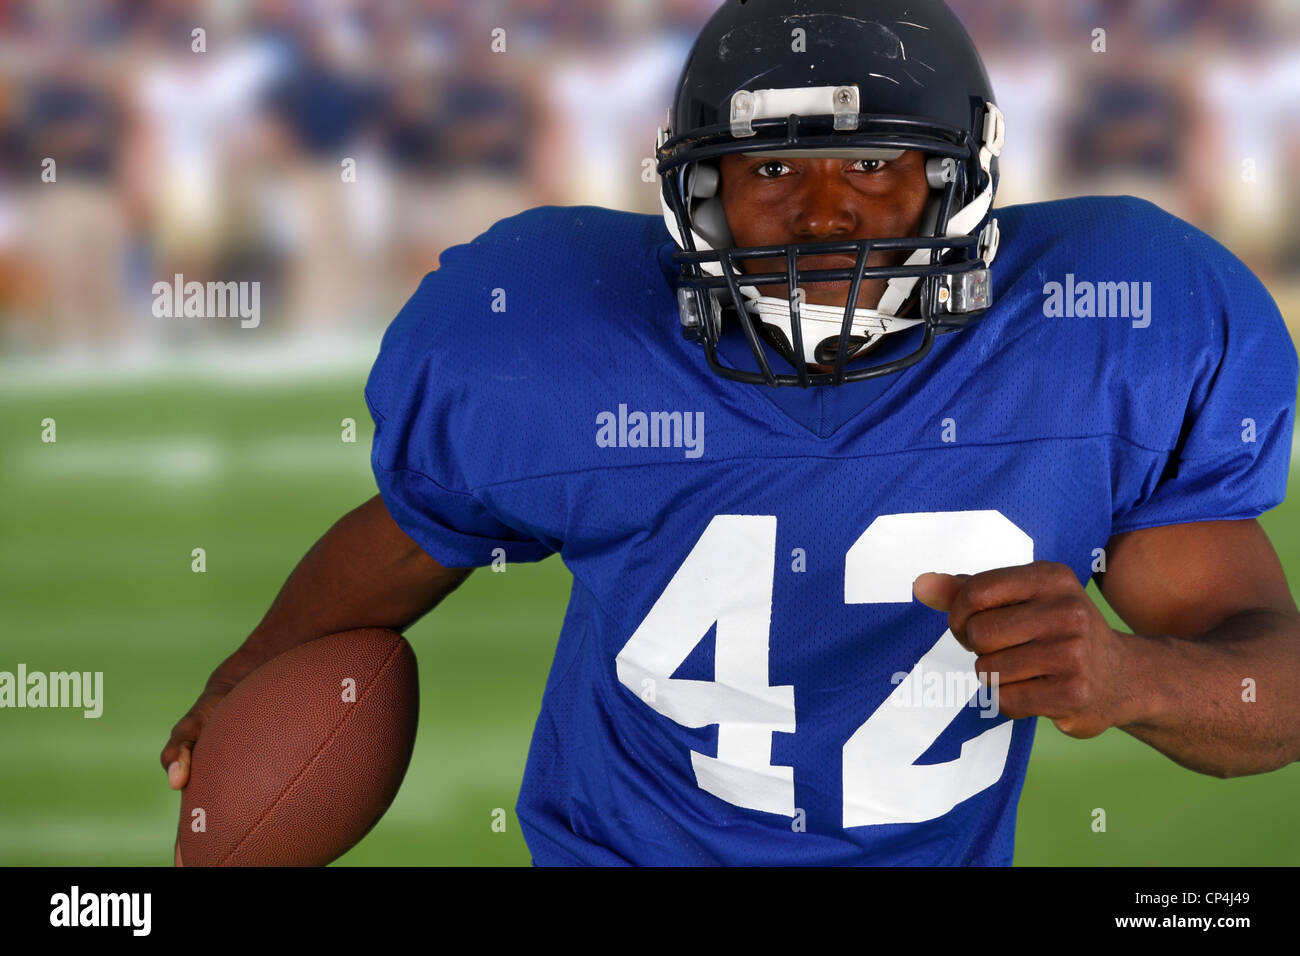 Football player playing in a game on field Stock Photo